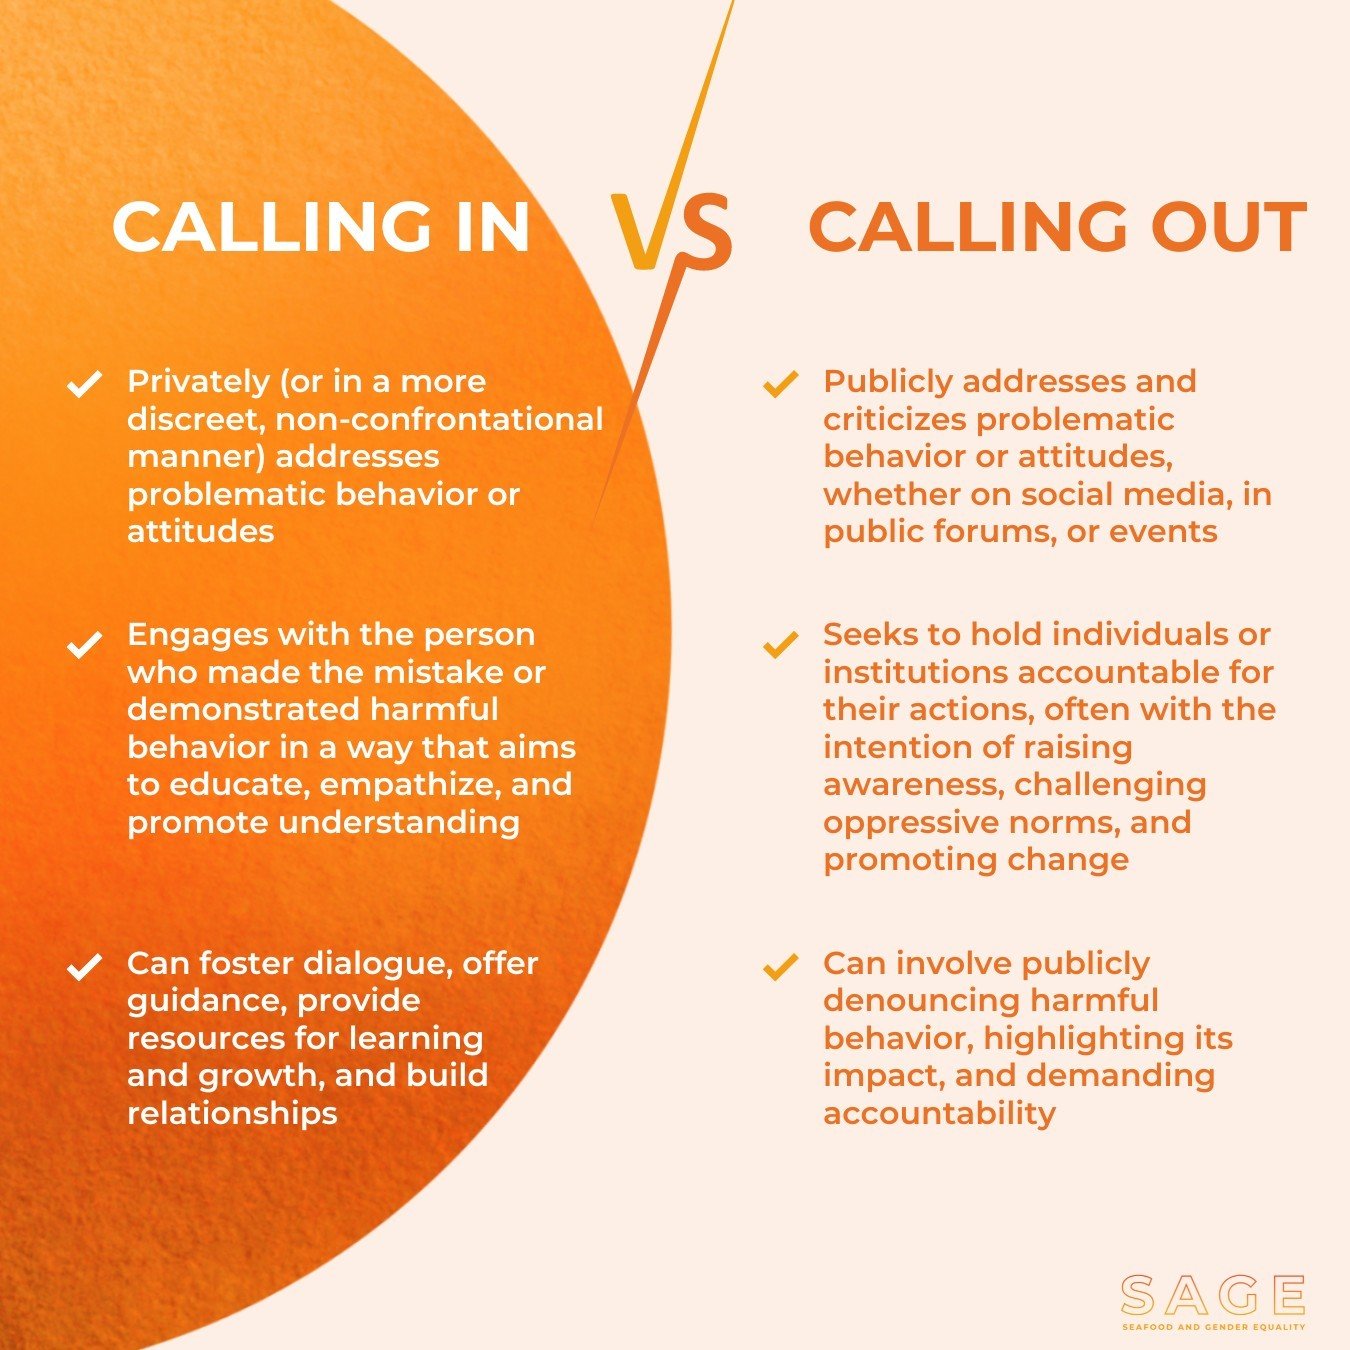 Let&rsquo;s talk about &ldquo;calling in&rdquo; vs. &ldquo;calling out&rdquo;! ⁠
⁠
These terms describe two different and valid approaches to dealing with problematic behavior or attitudes, particularly around issues of oppression, discrimination, or